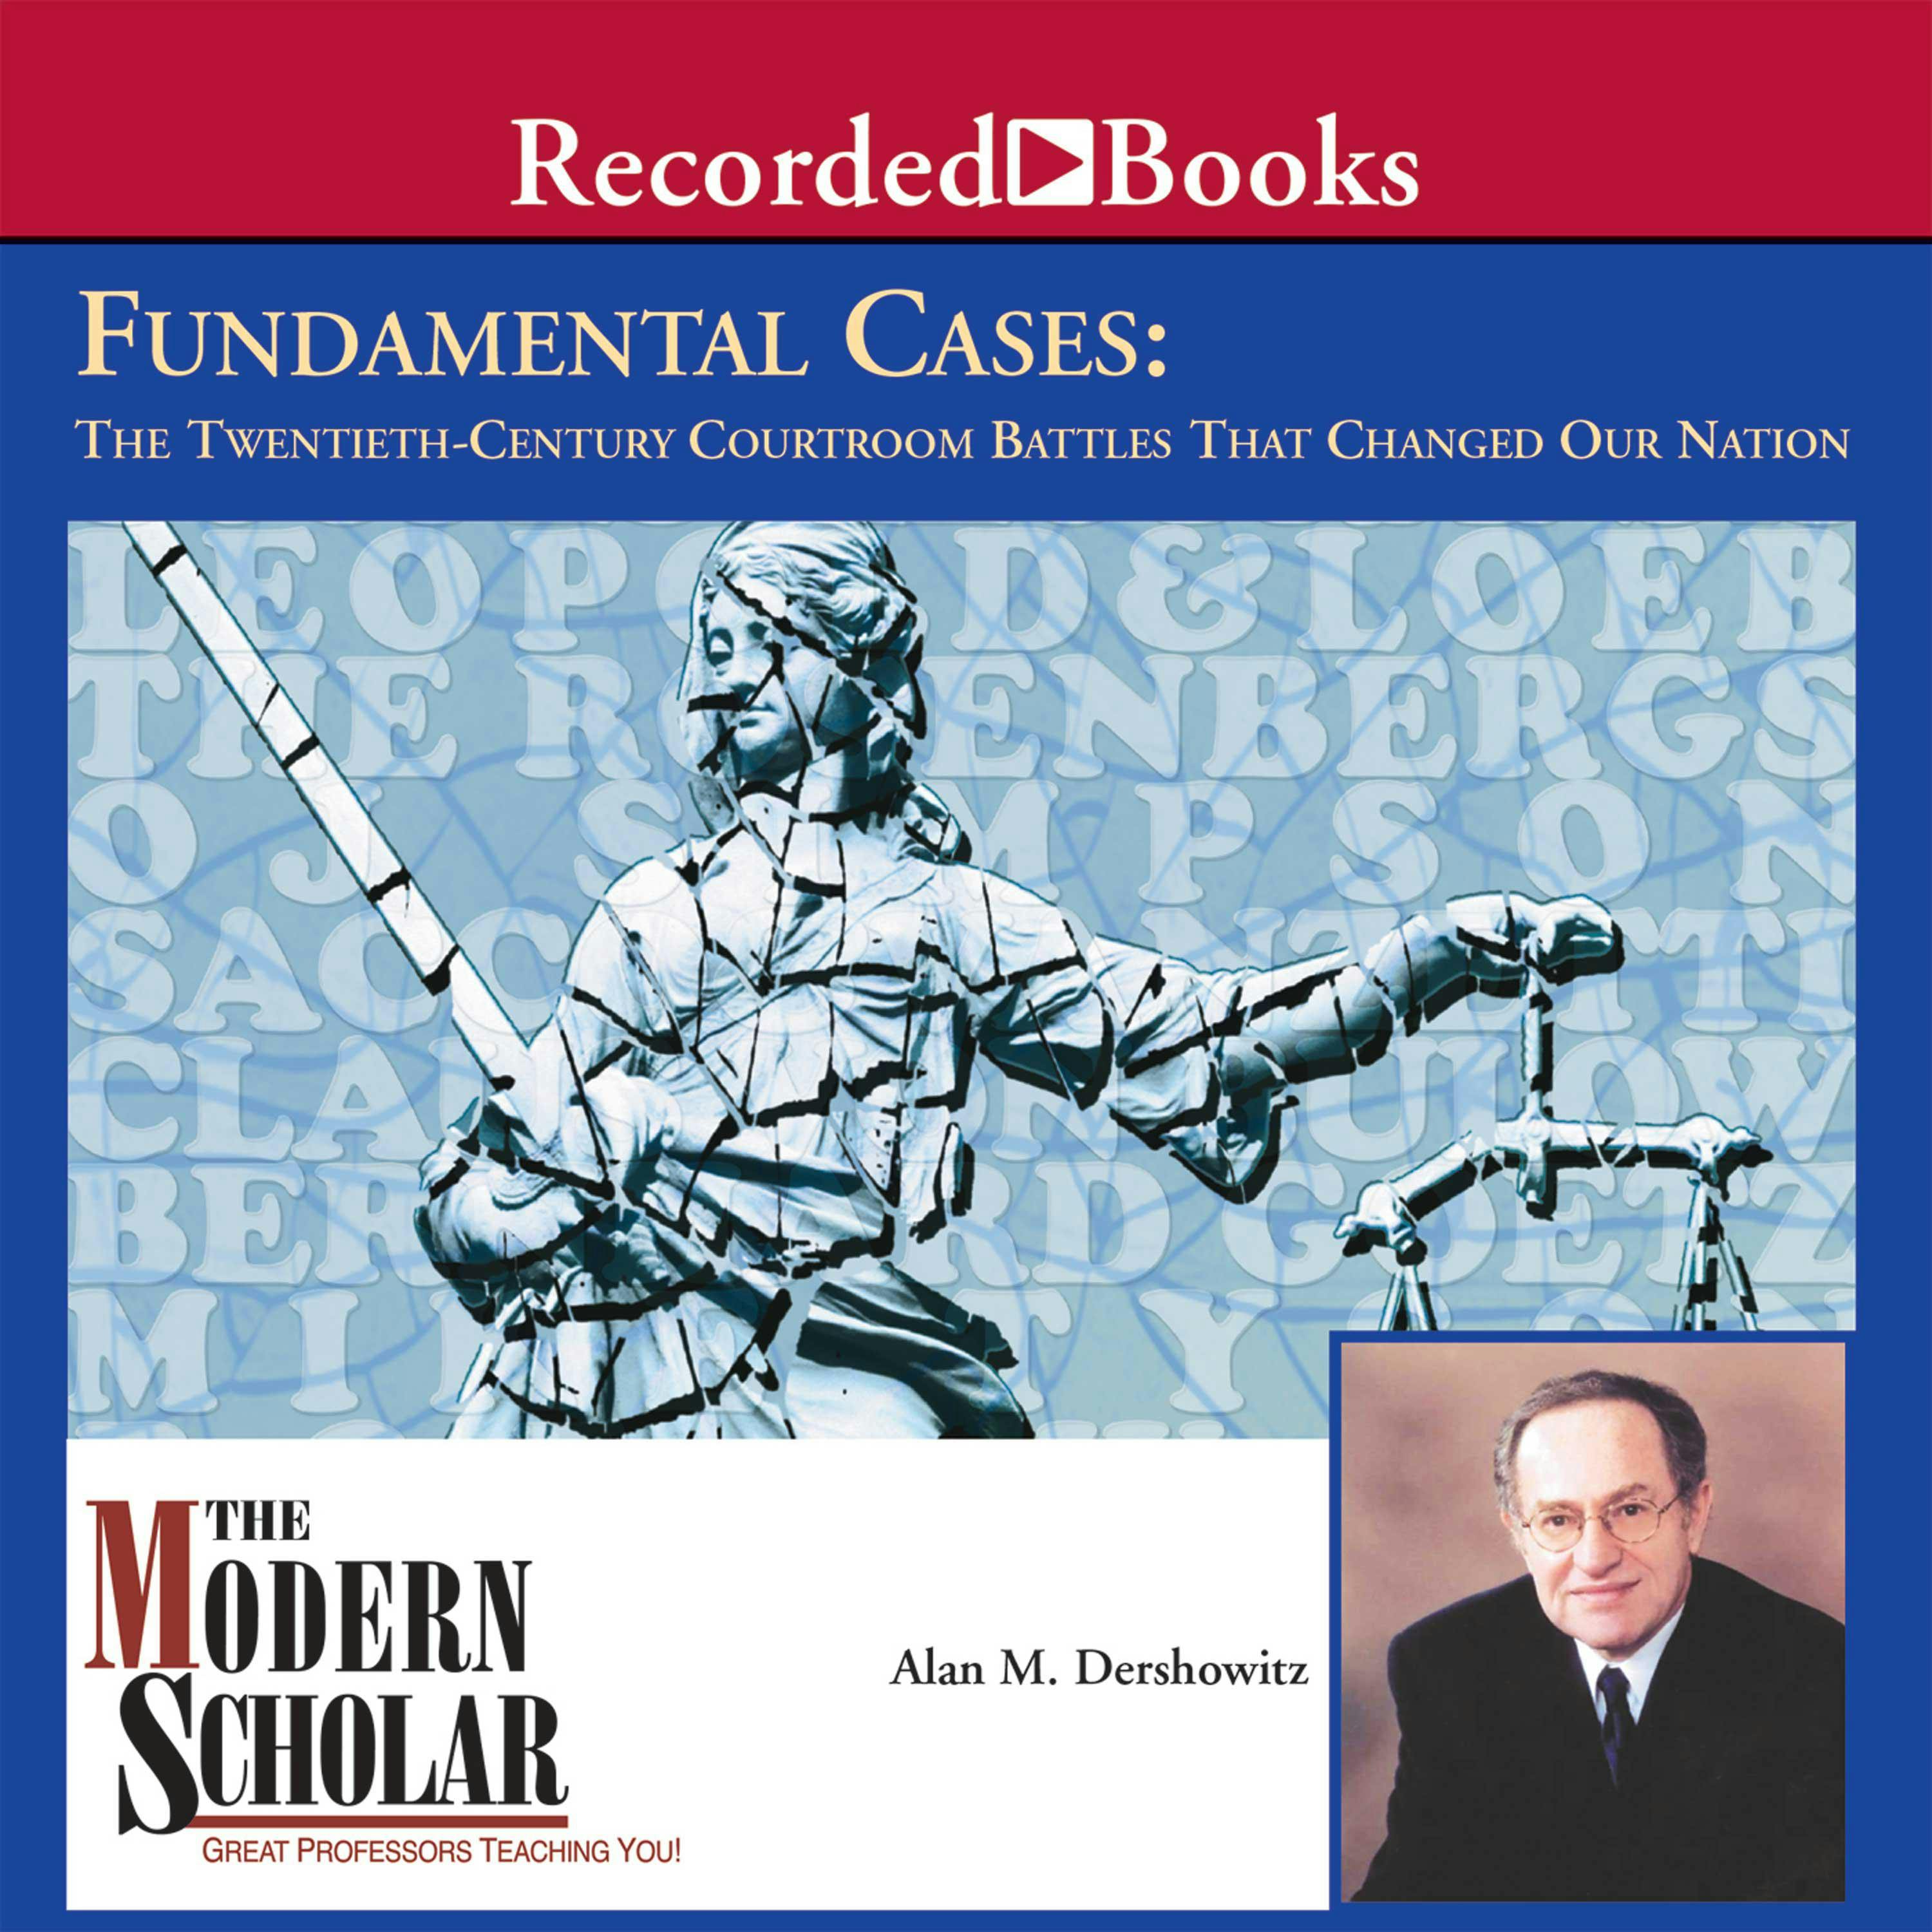 Fundamental Cases: The Twentieth-century Courtroom Battles That Changed Our Nation (was Landmark Cases of the 20th Century): The Twentieth Century Courtroom Battles That Changed Our Nation - Alan M. Dershowitz